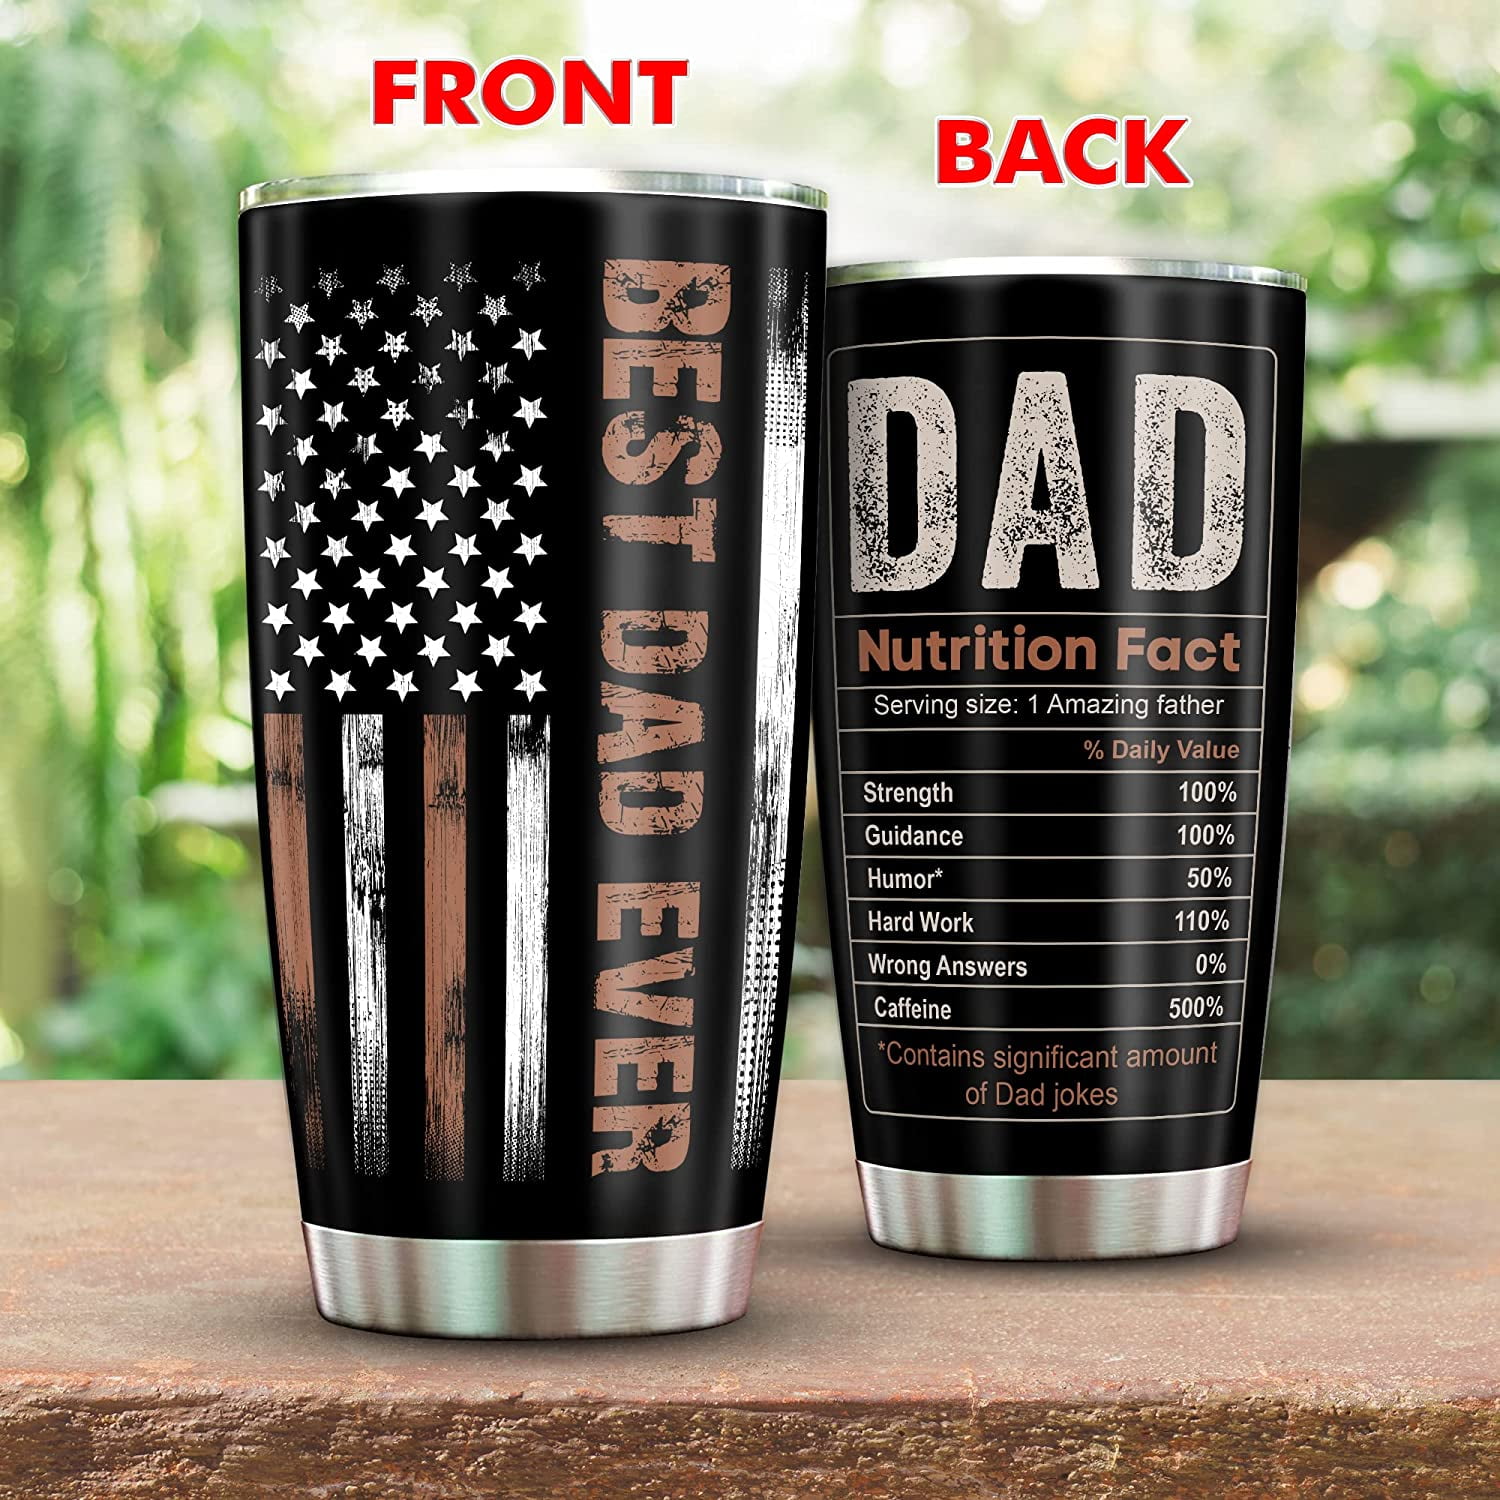 Twin Mama – Engraved Stainless Steel Tumbler, Twin Mom Tumbler